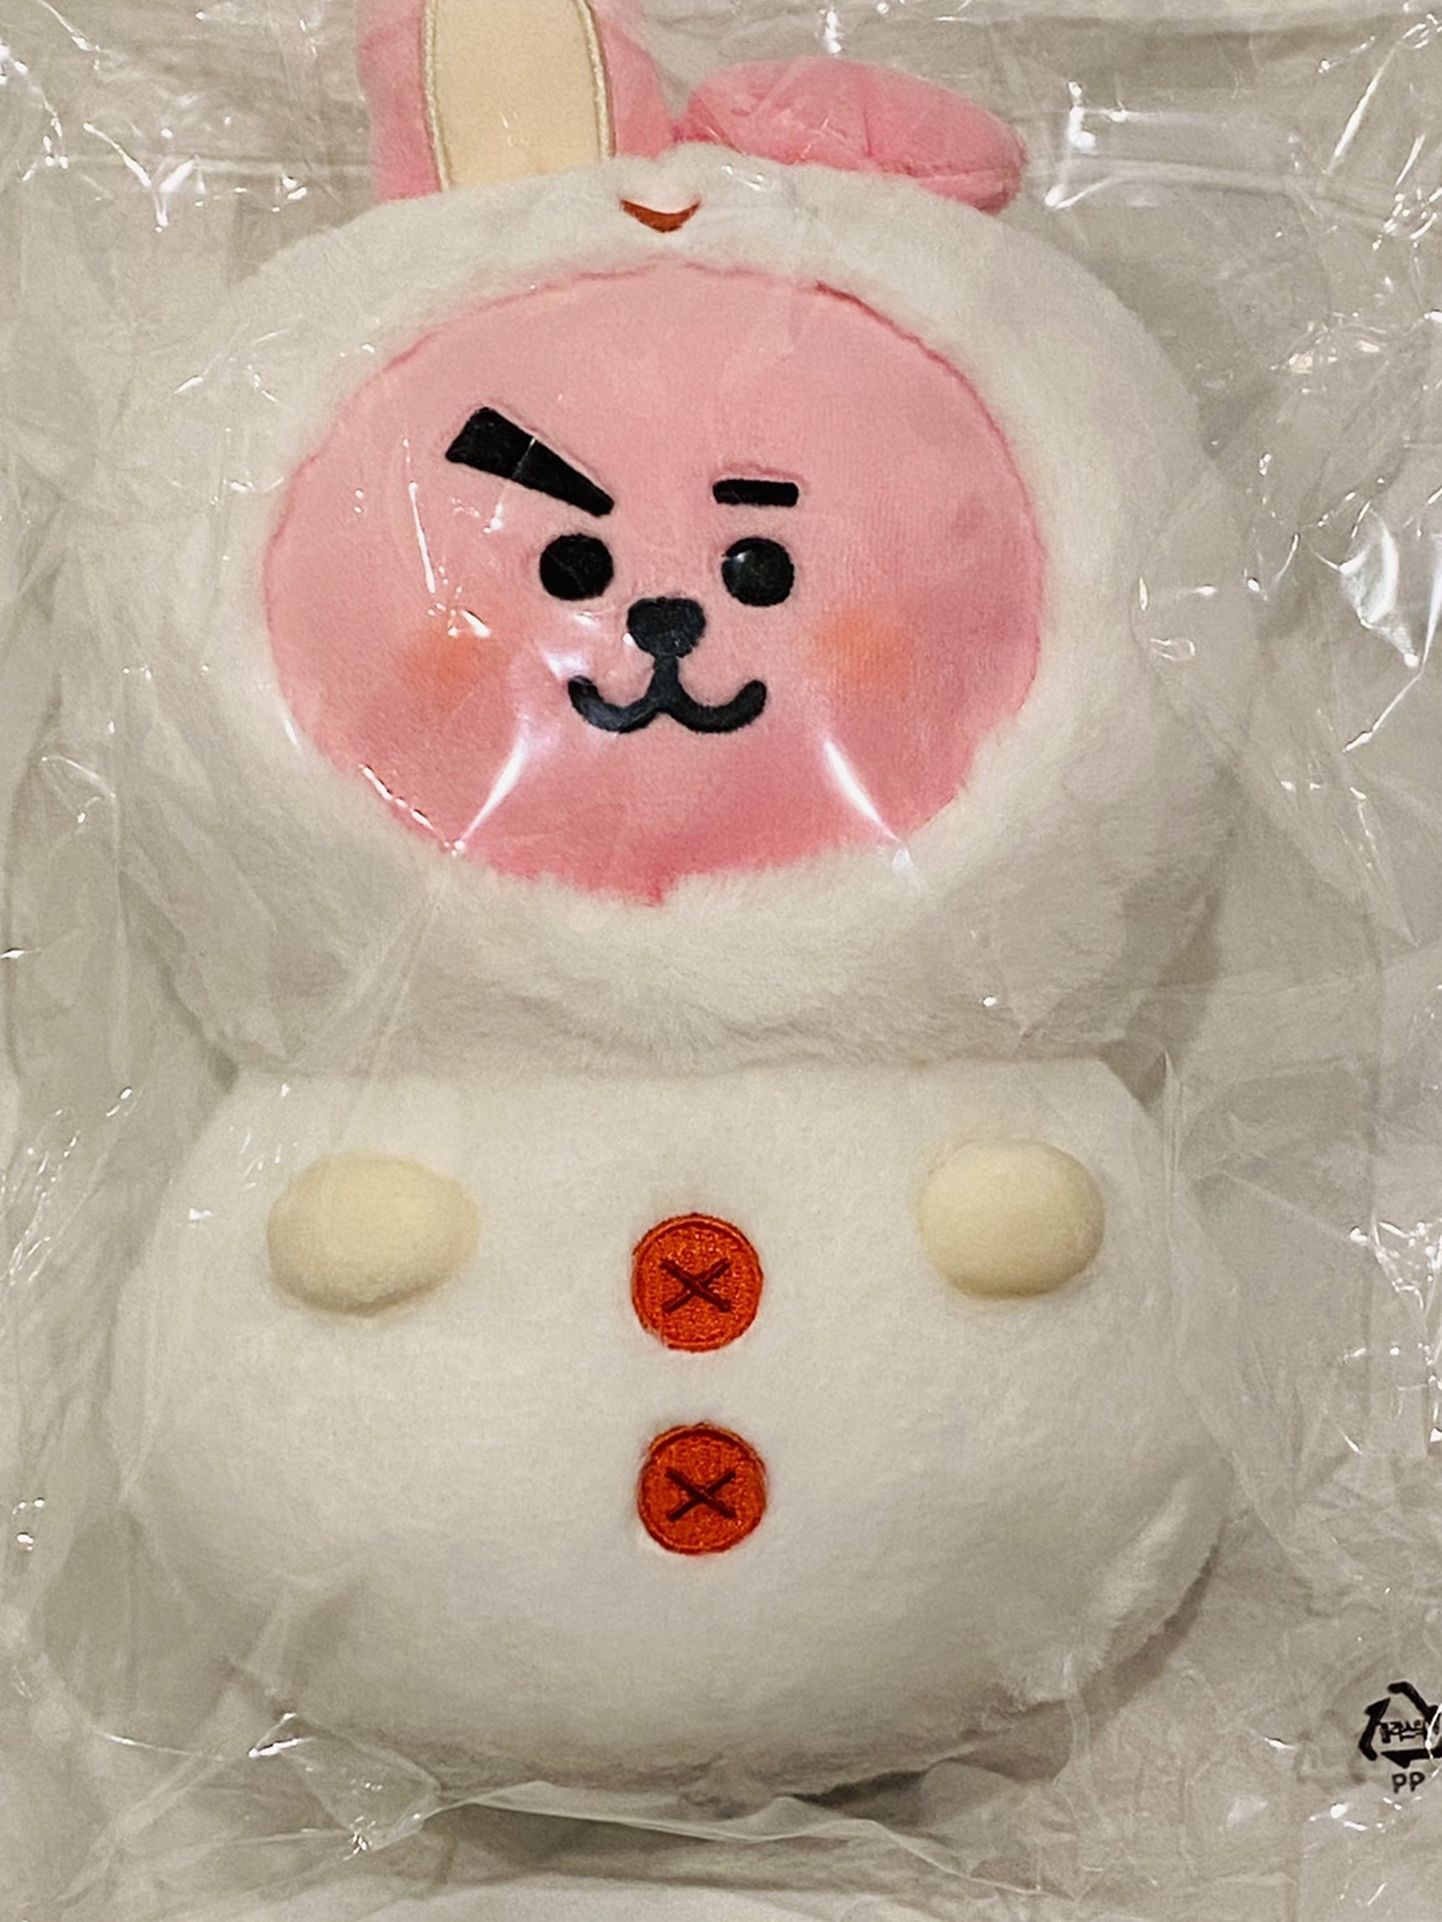 BTS BT21 Line Friends Official Christmas Winter Cooky Plush Plushie Doll NWT